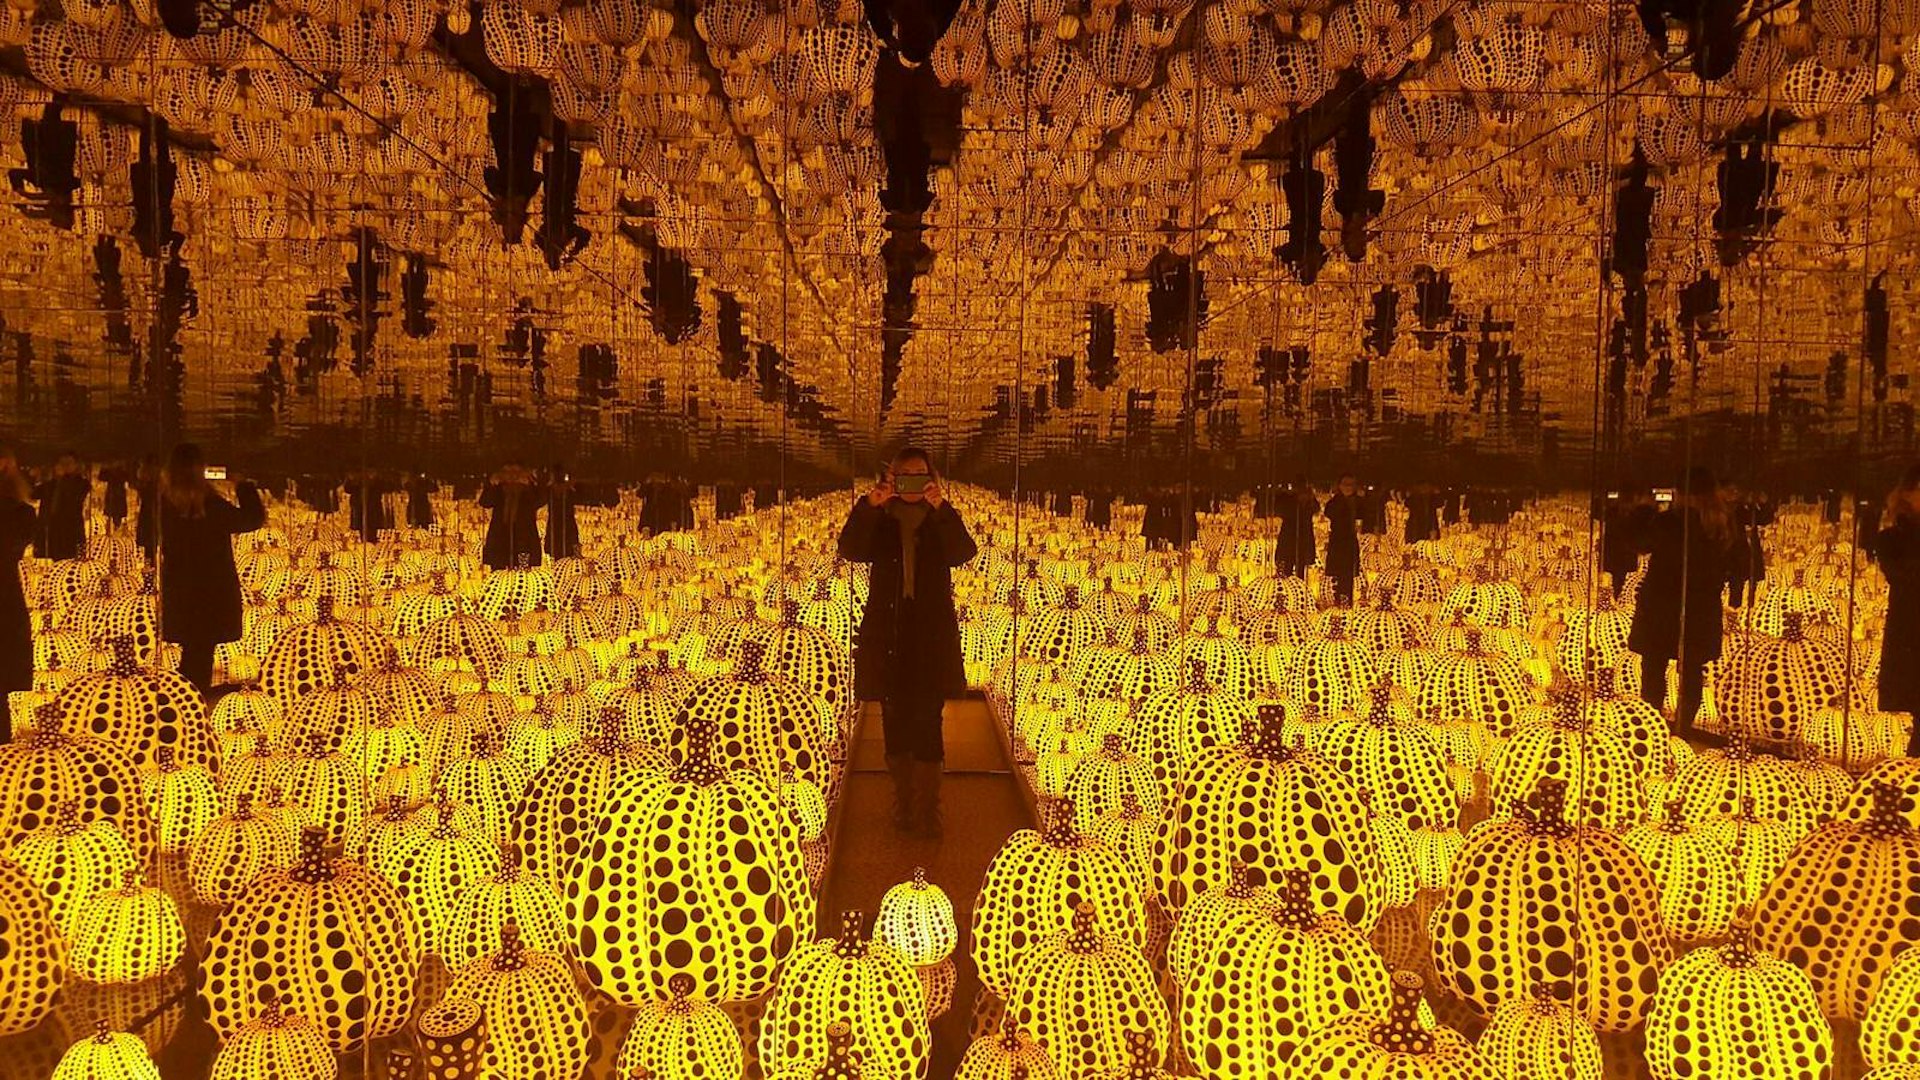 The writer stands amongst a mirrored room of orange-lit pumpkin sculptures in the Chiostro del Bramante